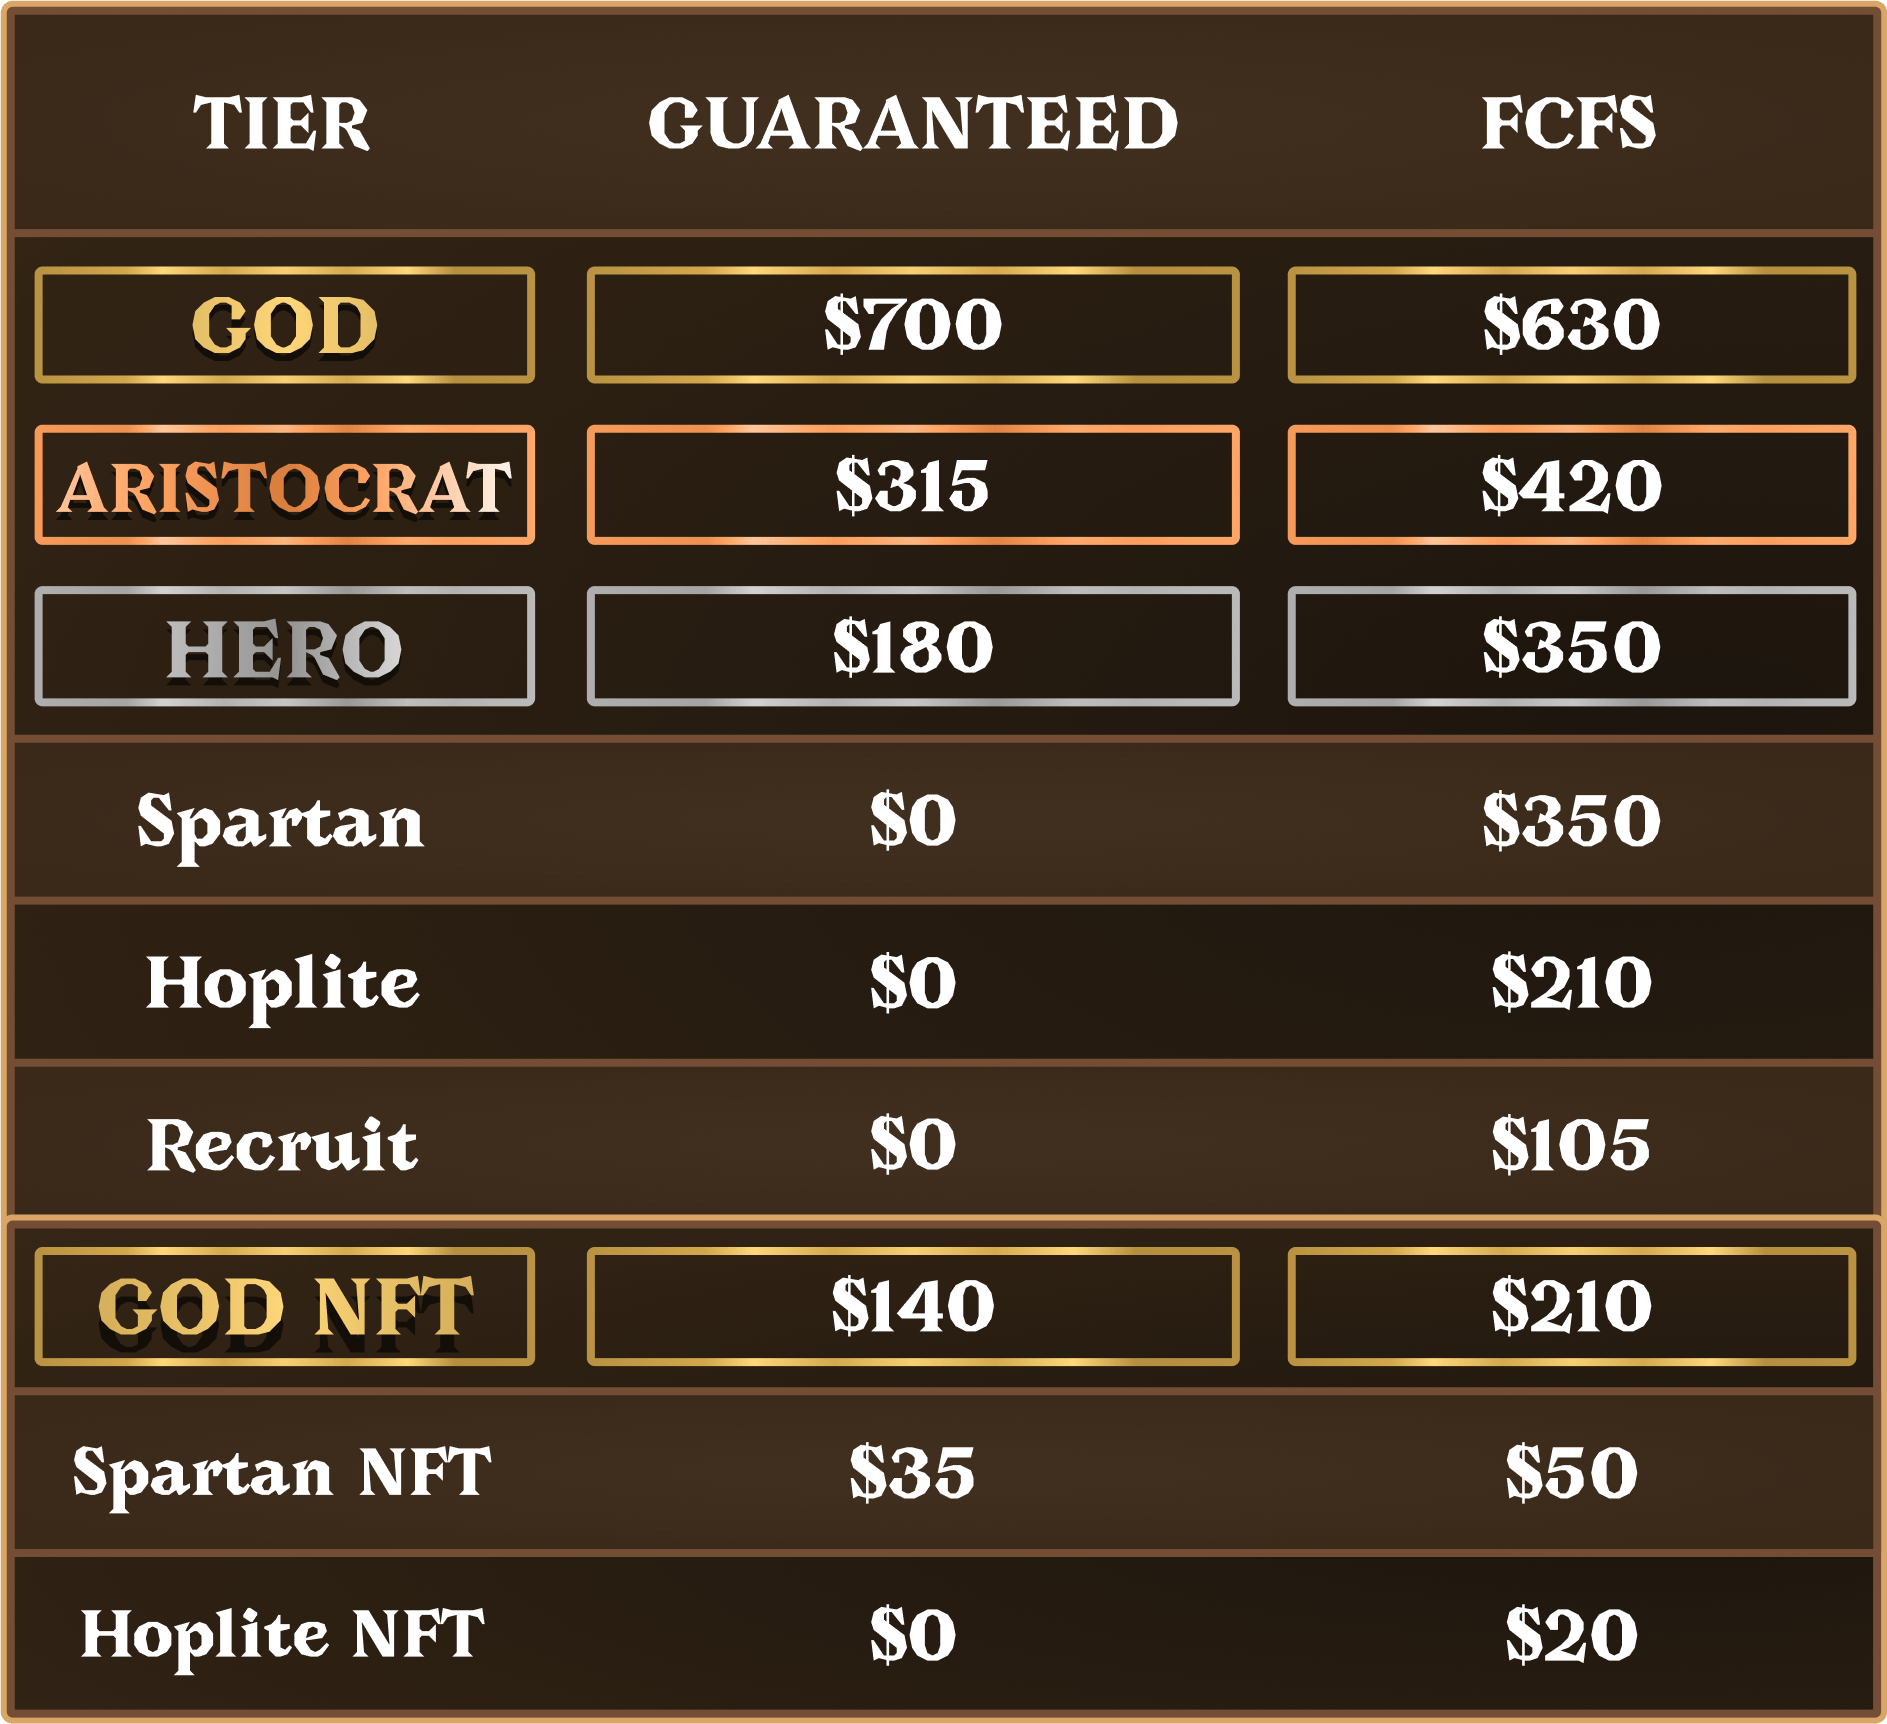 Staking requirements for certain Tiers are as follows: ⚡ God Tier - 50,000 $SPARTA ⚔ Hero Tier - 15,000 $SPARTA 🛡 Spartan Tier - 10,000 $SPARTA 🗡 Hoplite Tier - 6,000 $SPARTA 🫡 Recruit Tier - 3,000 $SPARTA